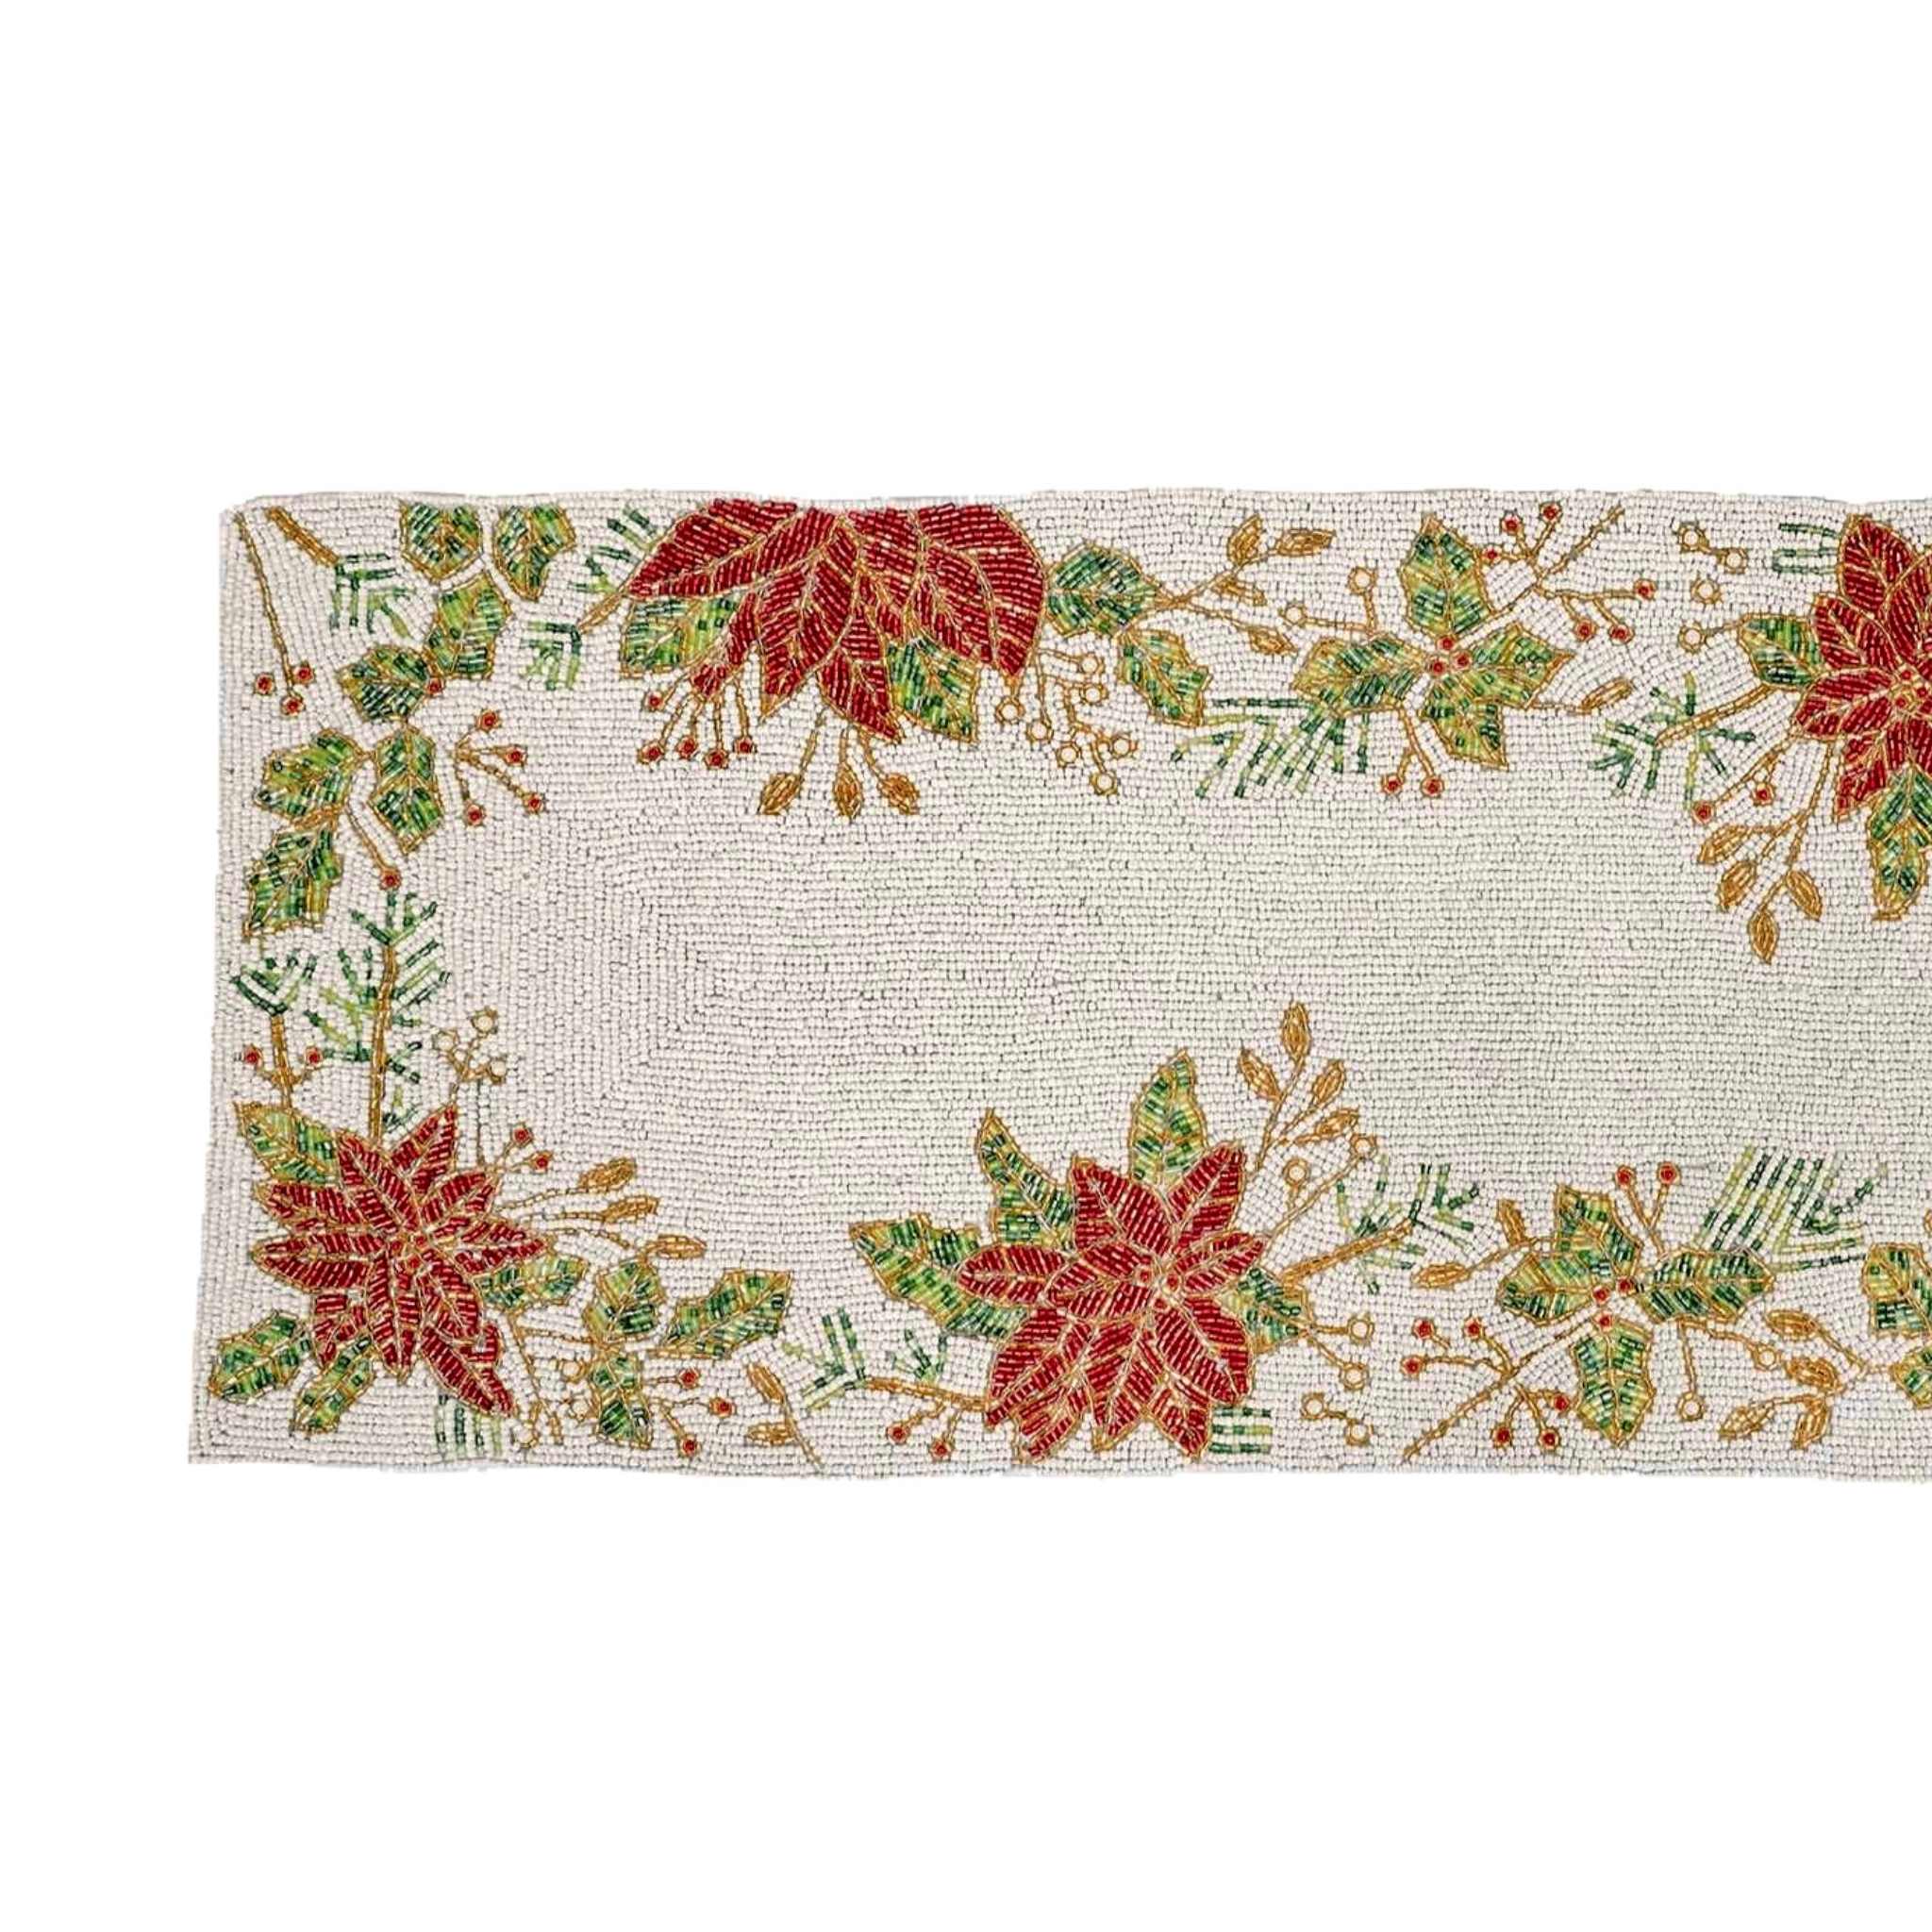 Tis' The Season Bead Embroidered Table Runner in Red, White & Green